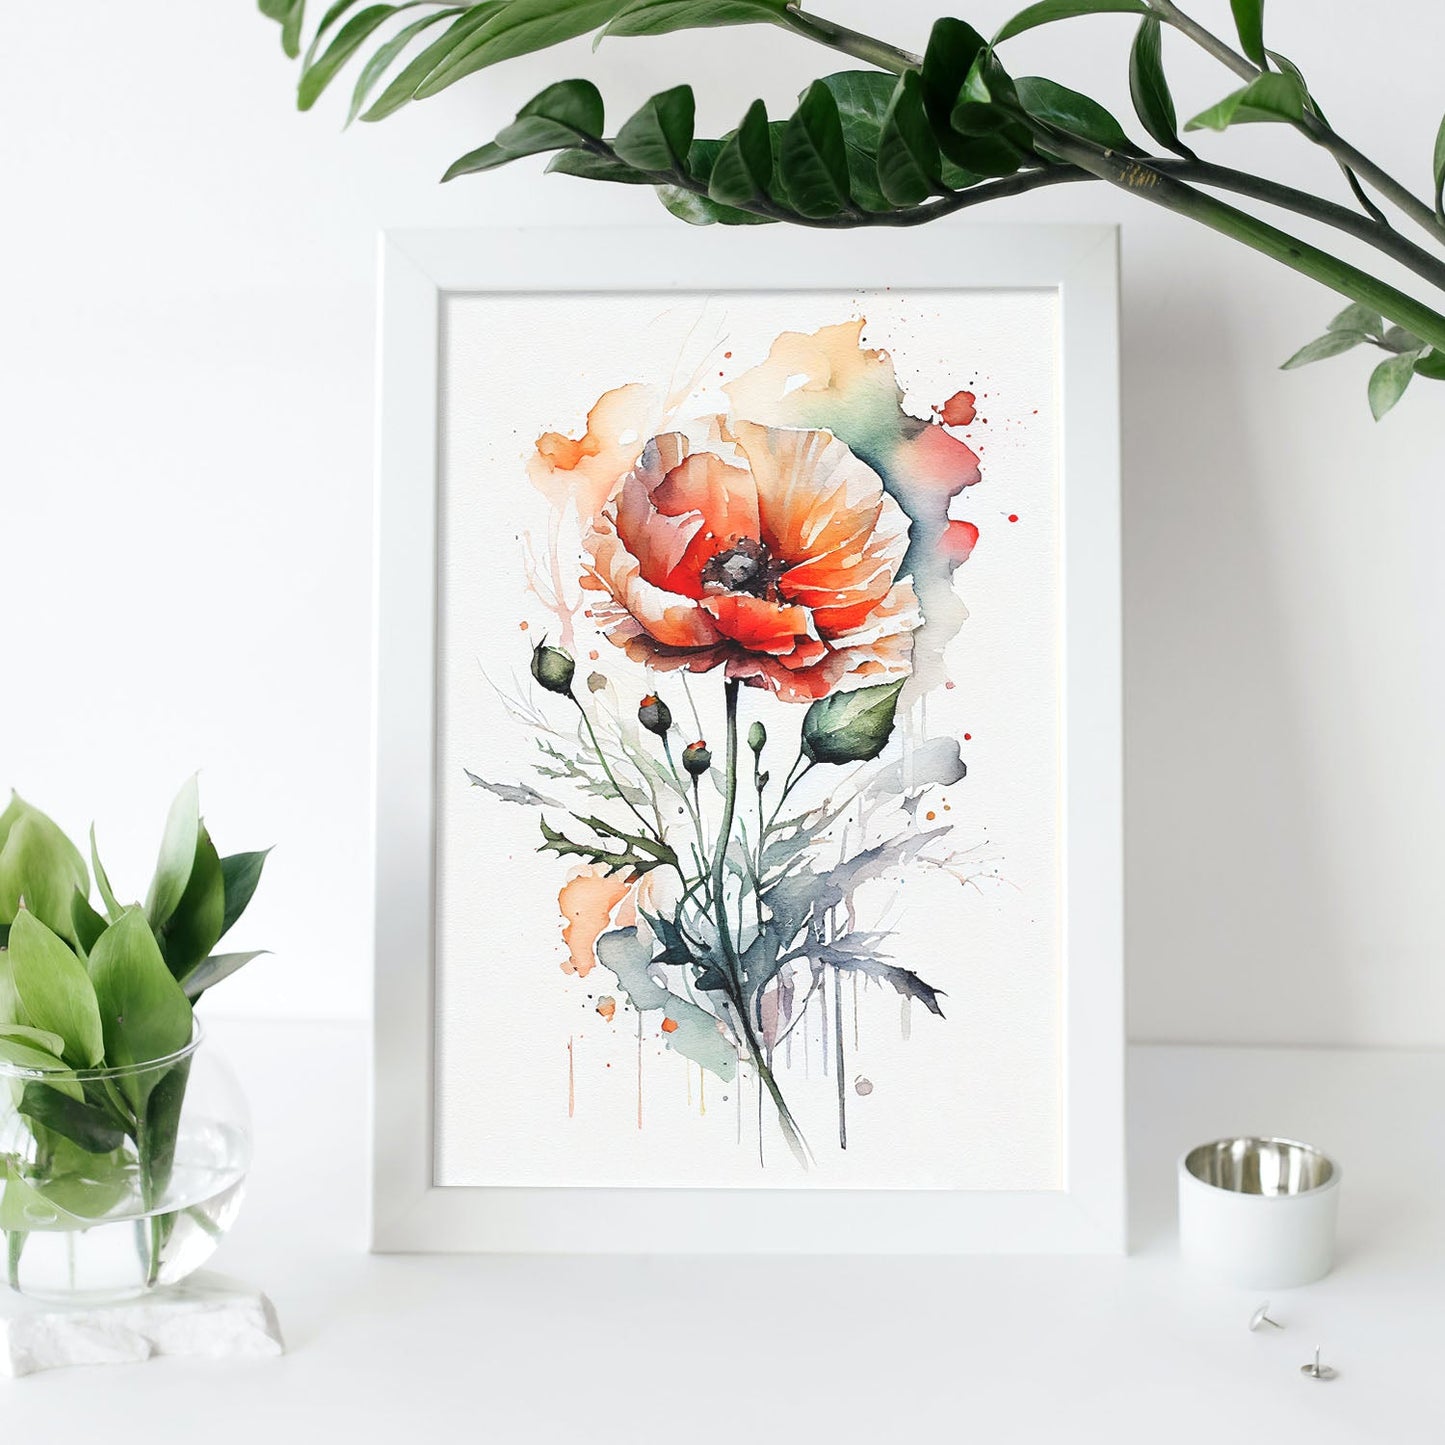 Nacnic watercolor minmal Poppy_3. Aesthetic Wall Art Prints for Bedroom or Living Room Design.